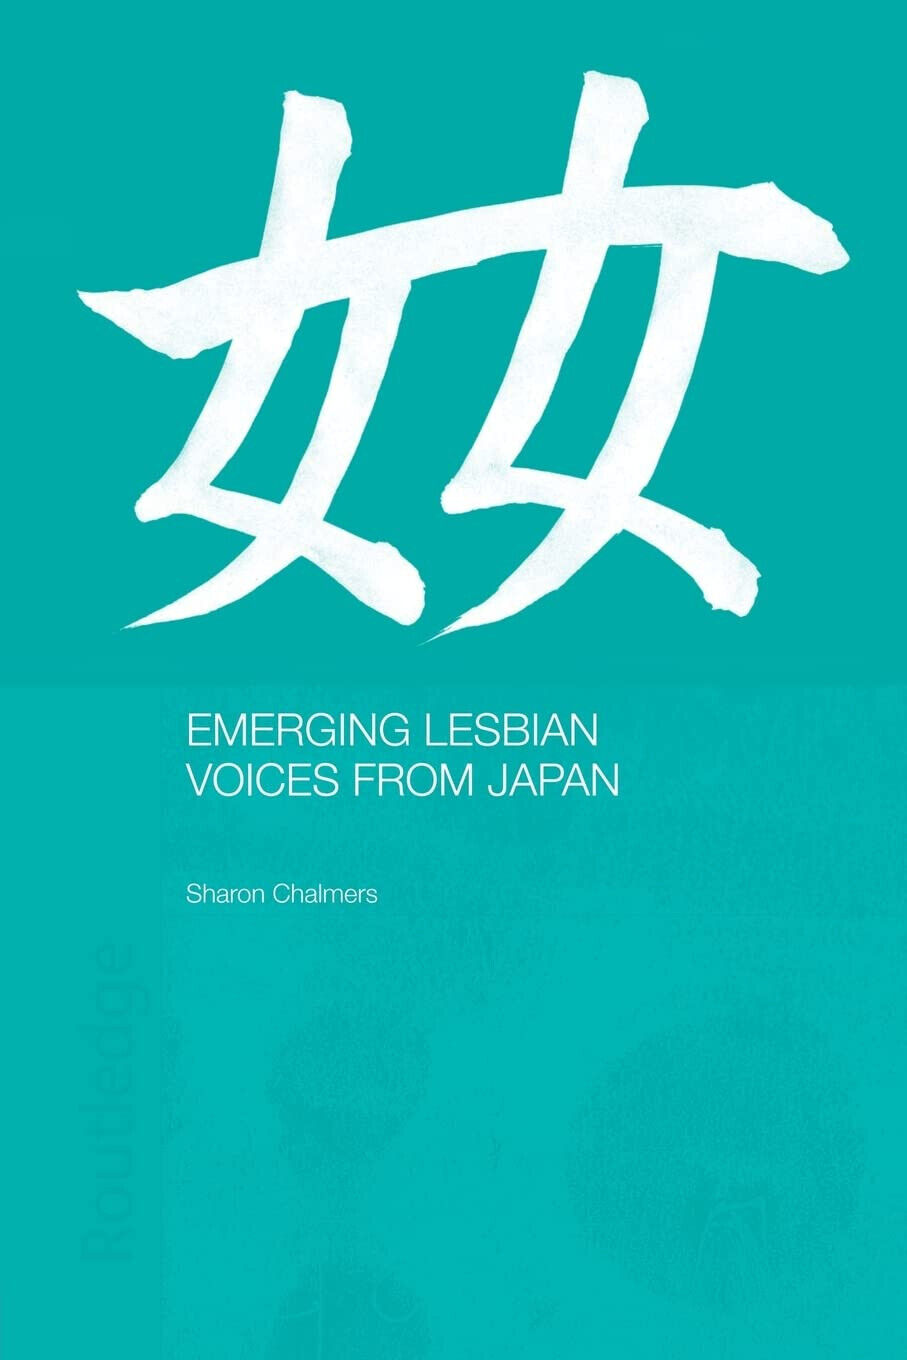 Emerging Lesbian Voices from Japan - Sharon Chalmers - Routledge, 2014